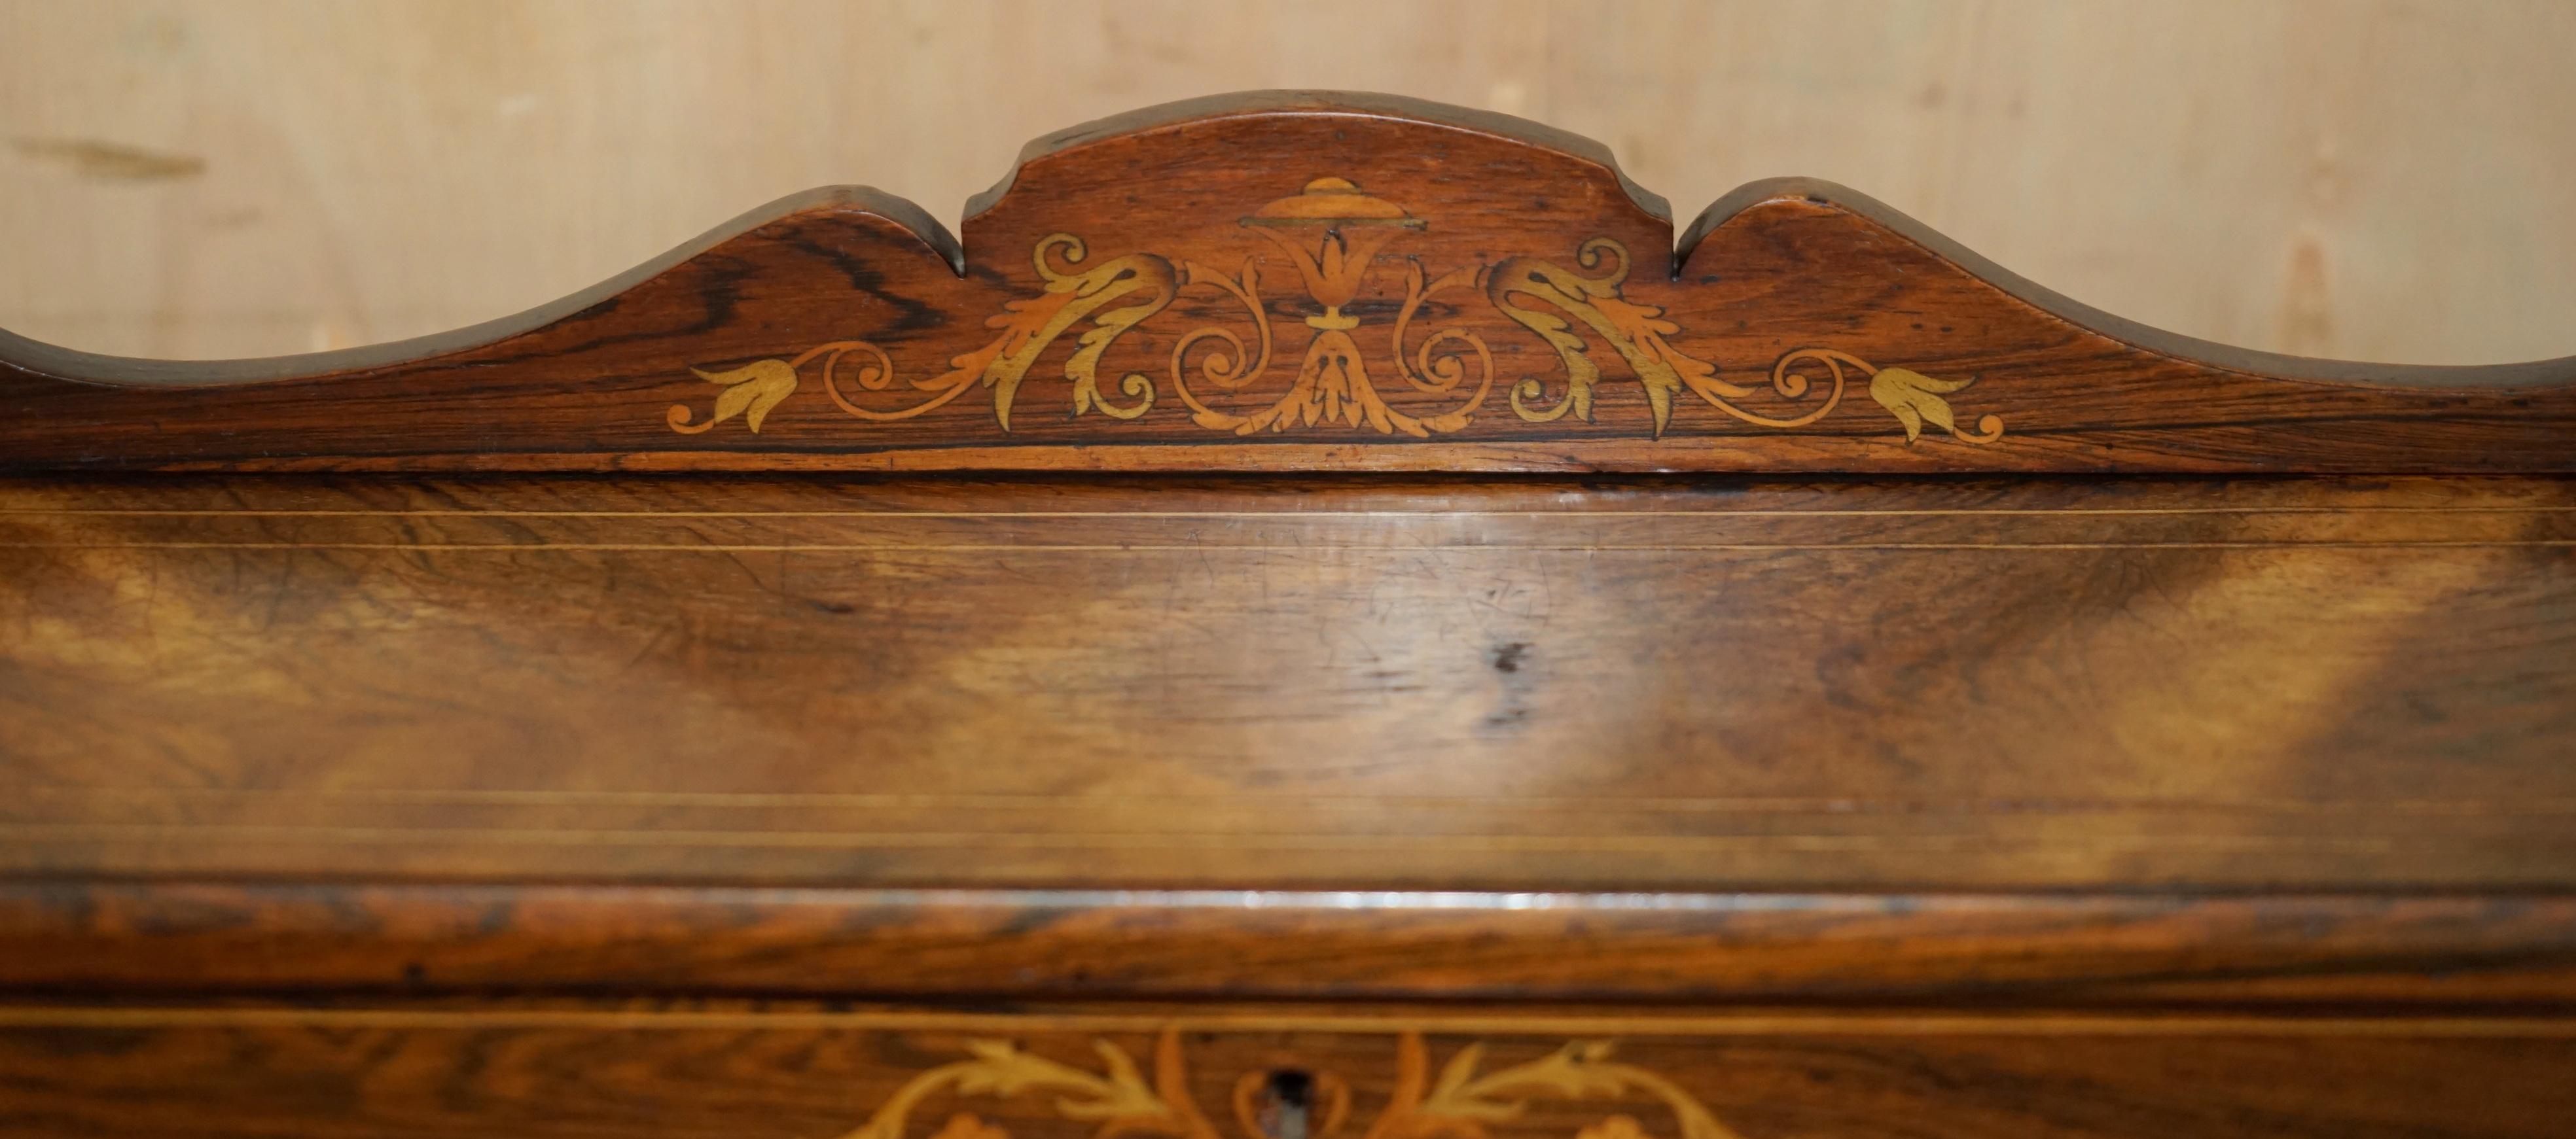 Hand-Crafted RESTORED ViCTORIAN HARDWOOD MARQUETRY INLAID & BROWN LEATHER DAVENPORT DESK For Sale